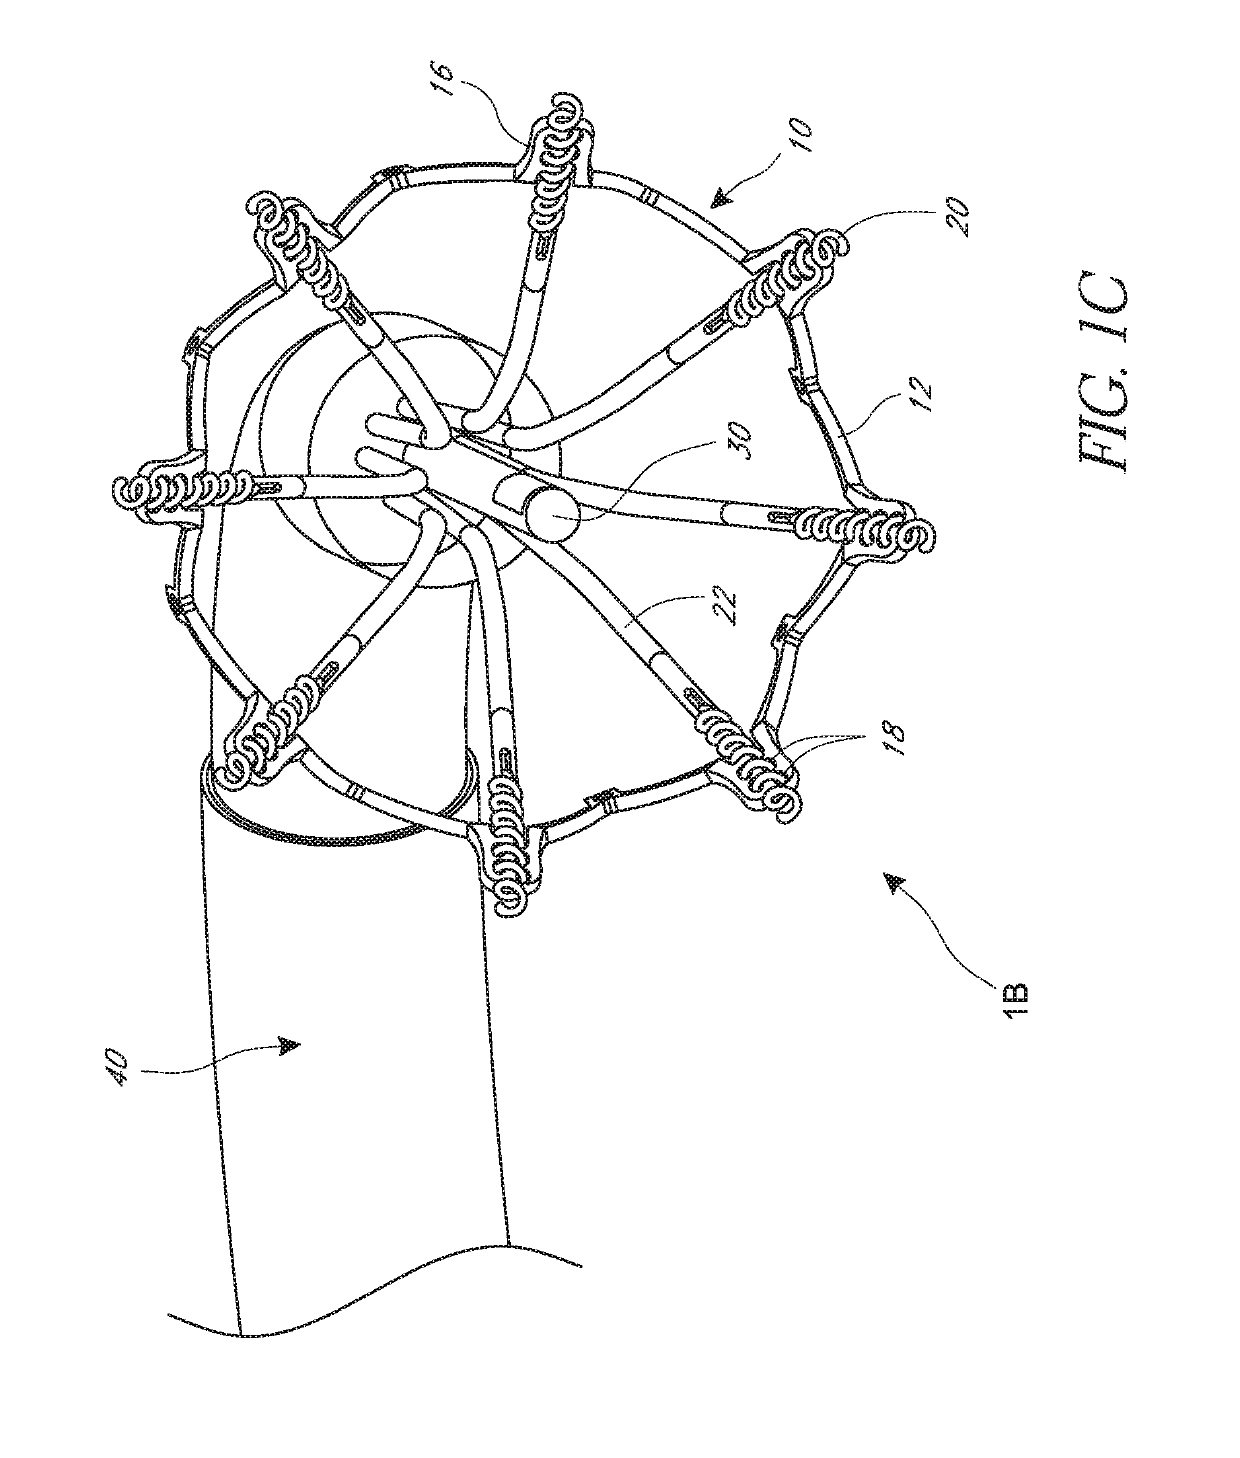 Methods for delivery of heart valve devices using intravascular ultrasound imaging